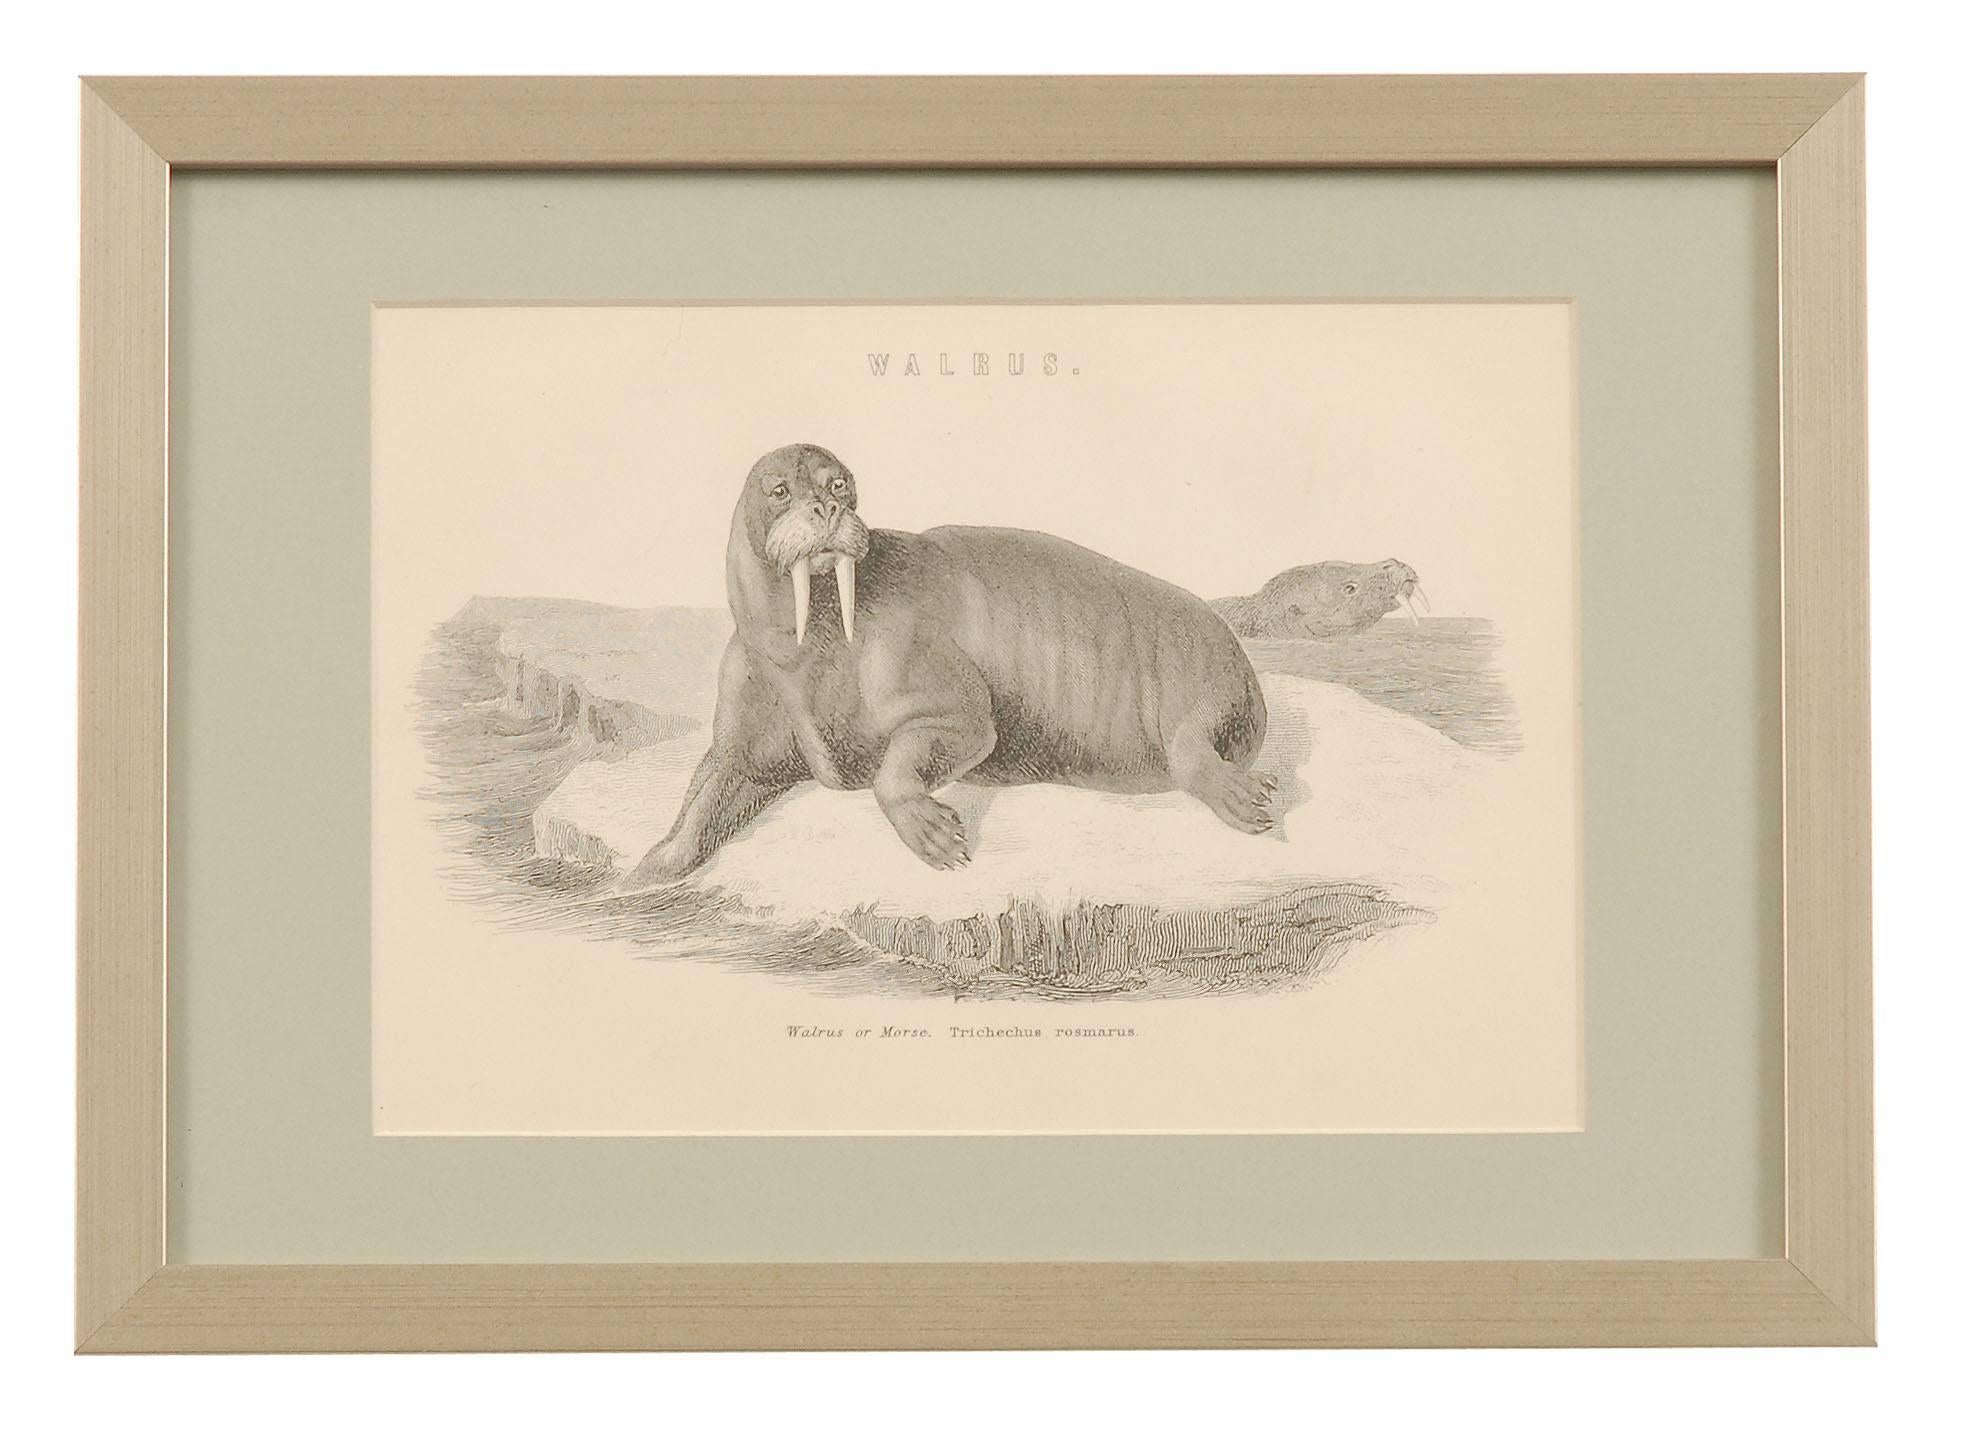 A lovely set of four framed Natural History Animal engravings from 1885. The prints were from the National Encyclopedia published in 1885. This was a high end publication, so all the lithographs and engravings are highly detailed and well printed.